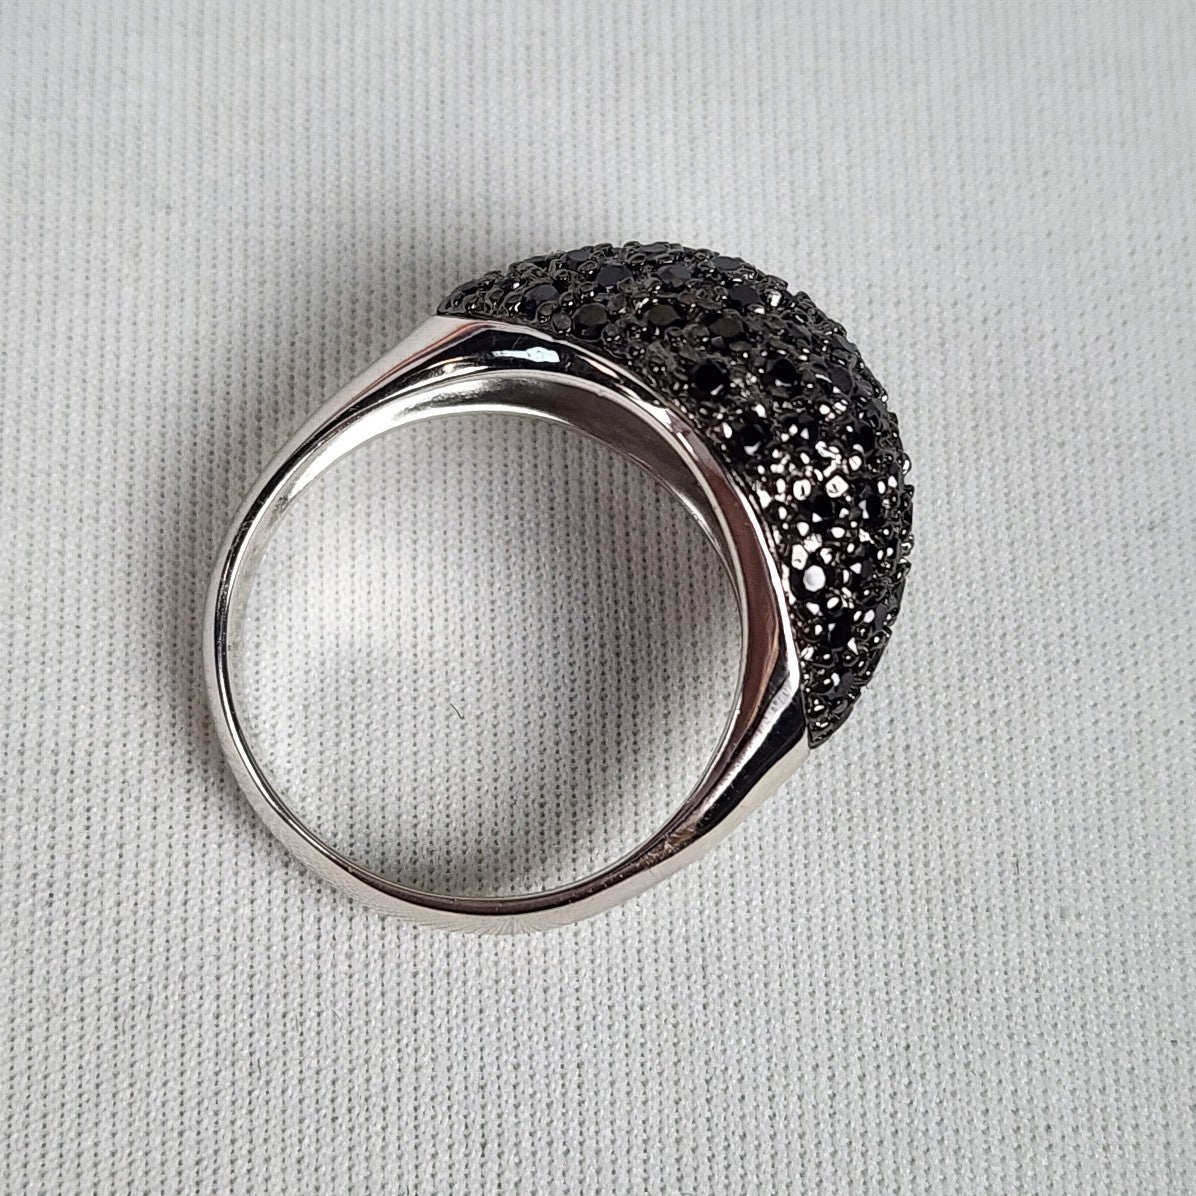 925 Sterling Silver Black Crystal Studded Ring Size 8